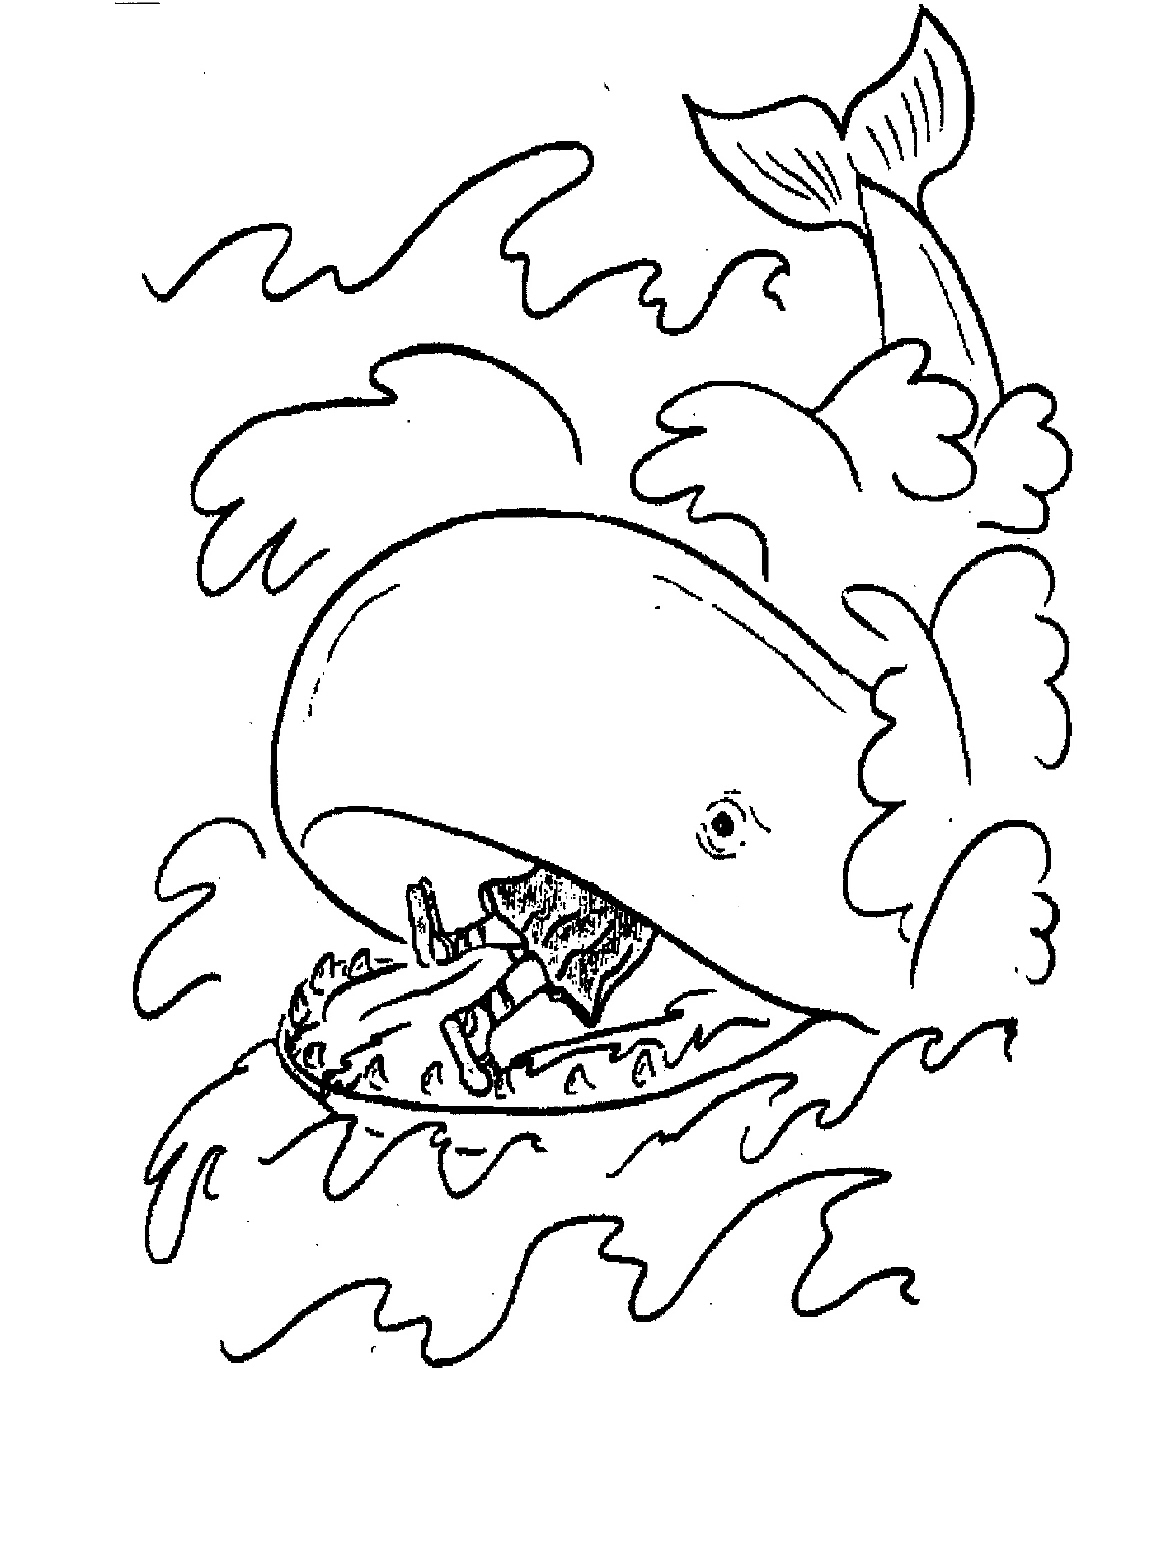 989 Cute Jonah And The Whale Coloring Pages For Kids with Animal character